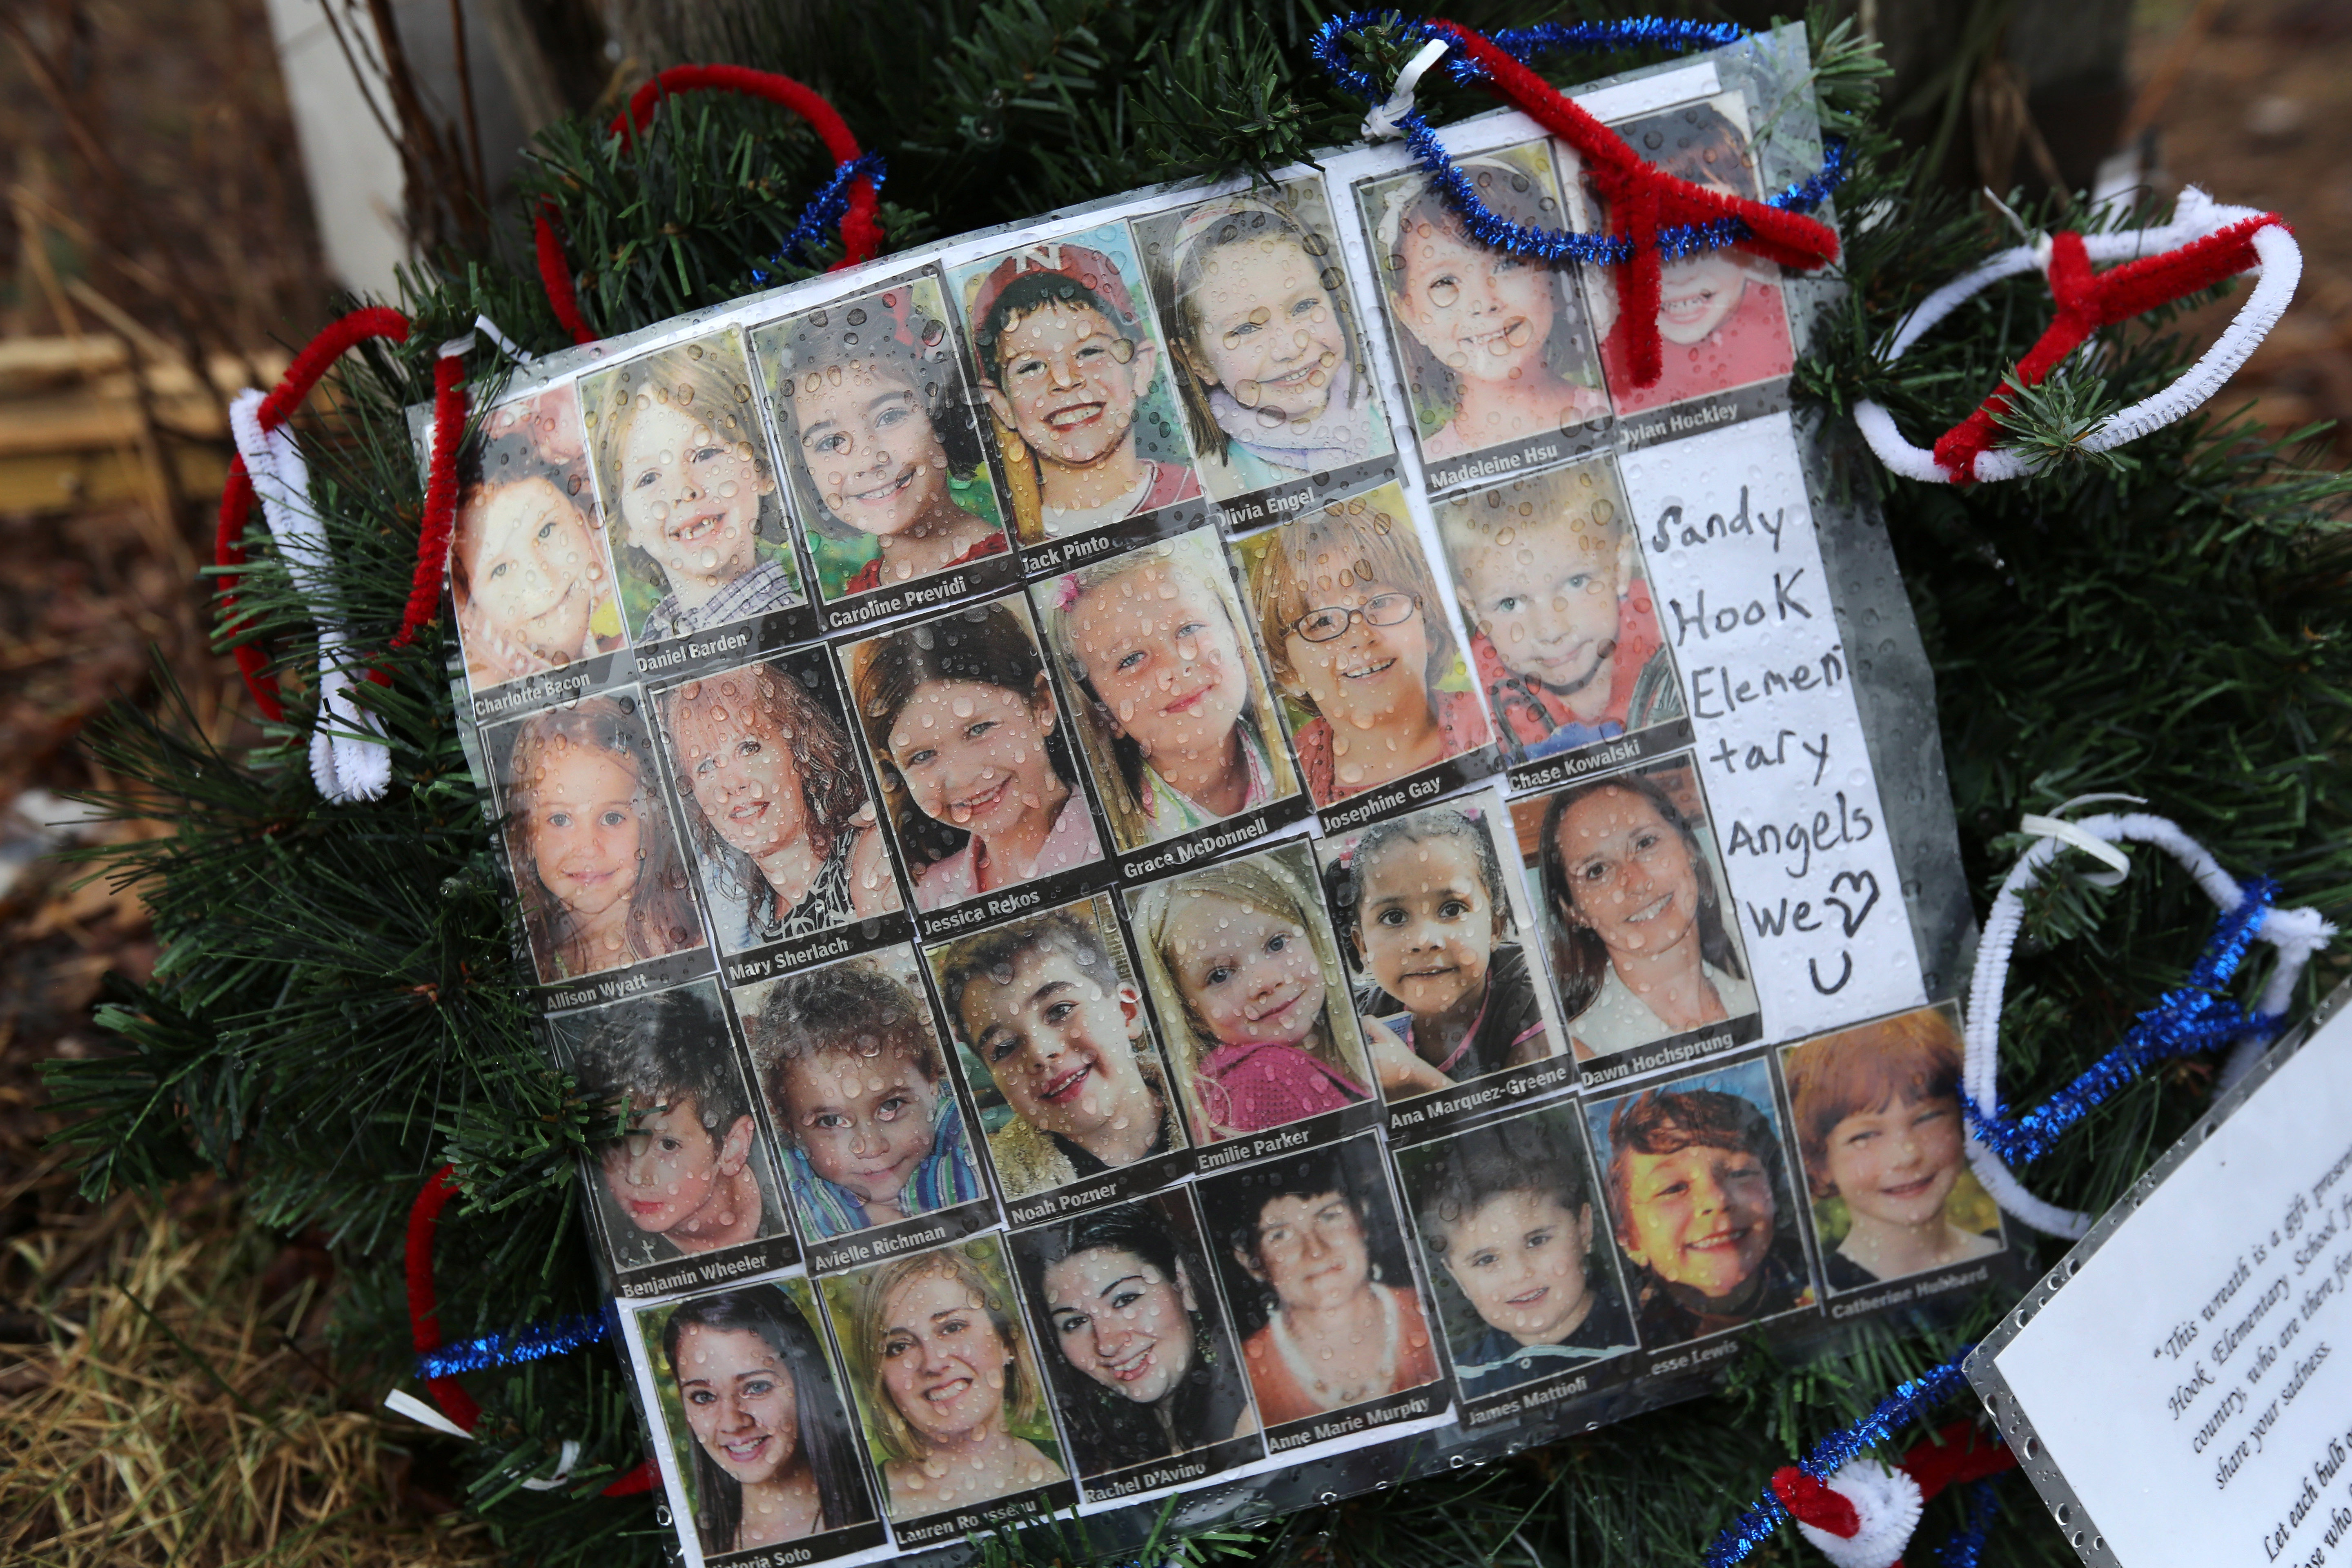 "Personal reflection" marks 2nd anniversary of Newtown school shooting